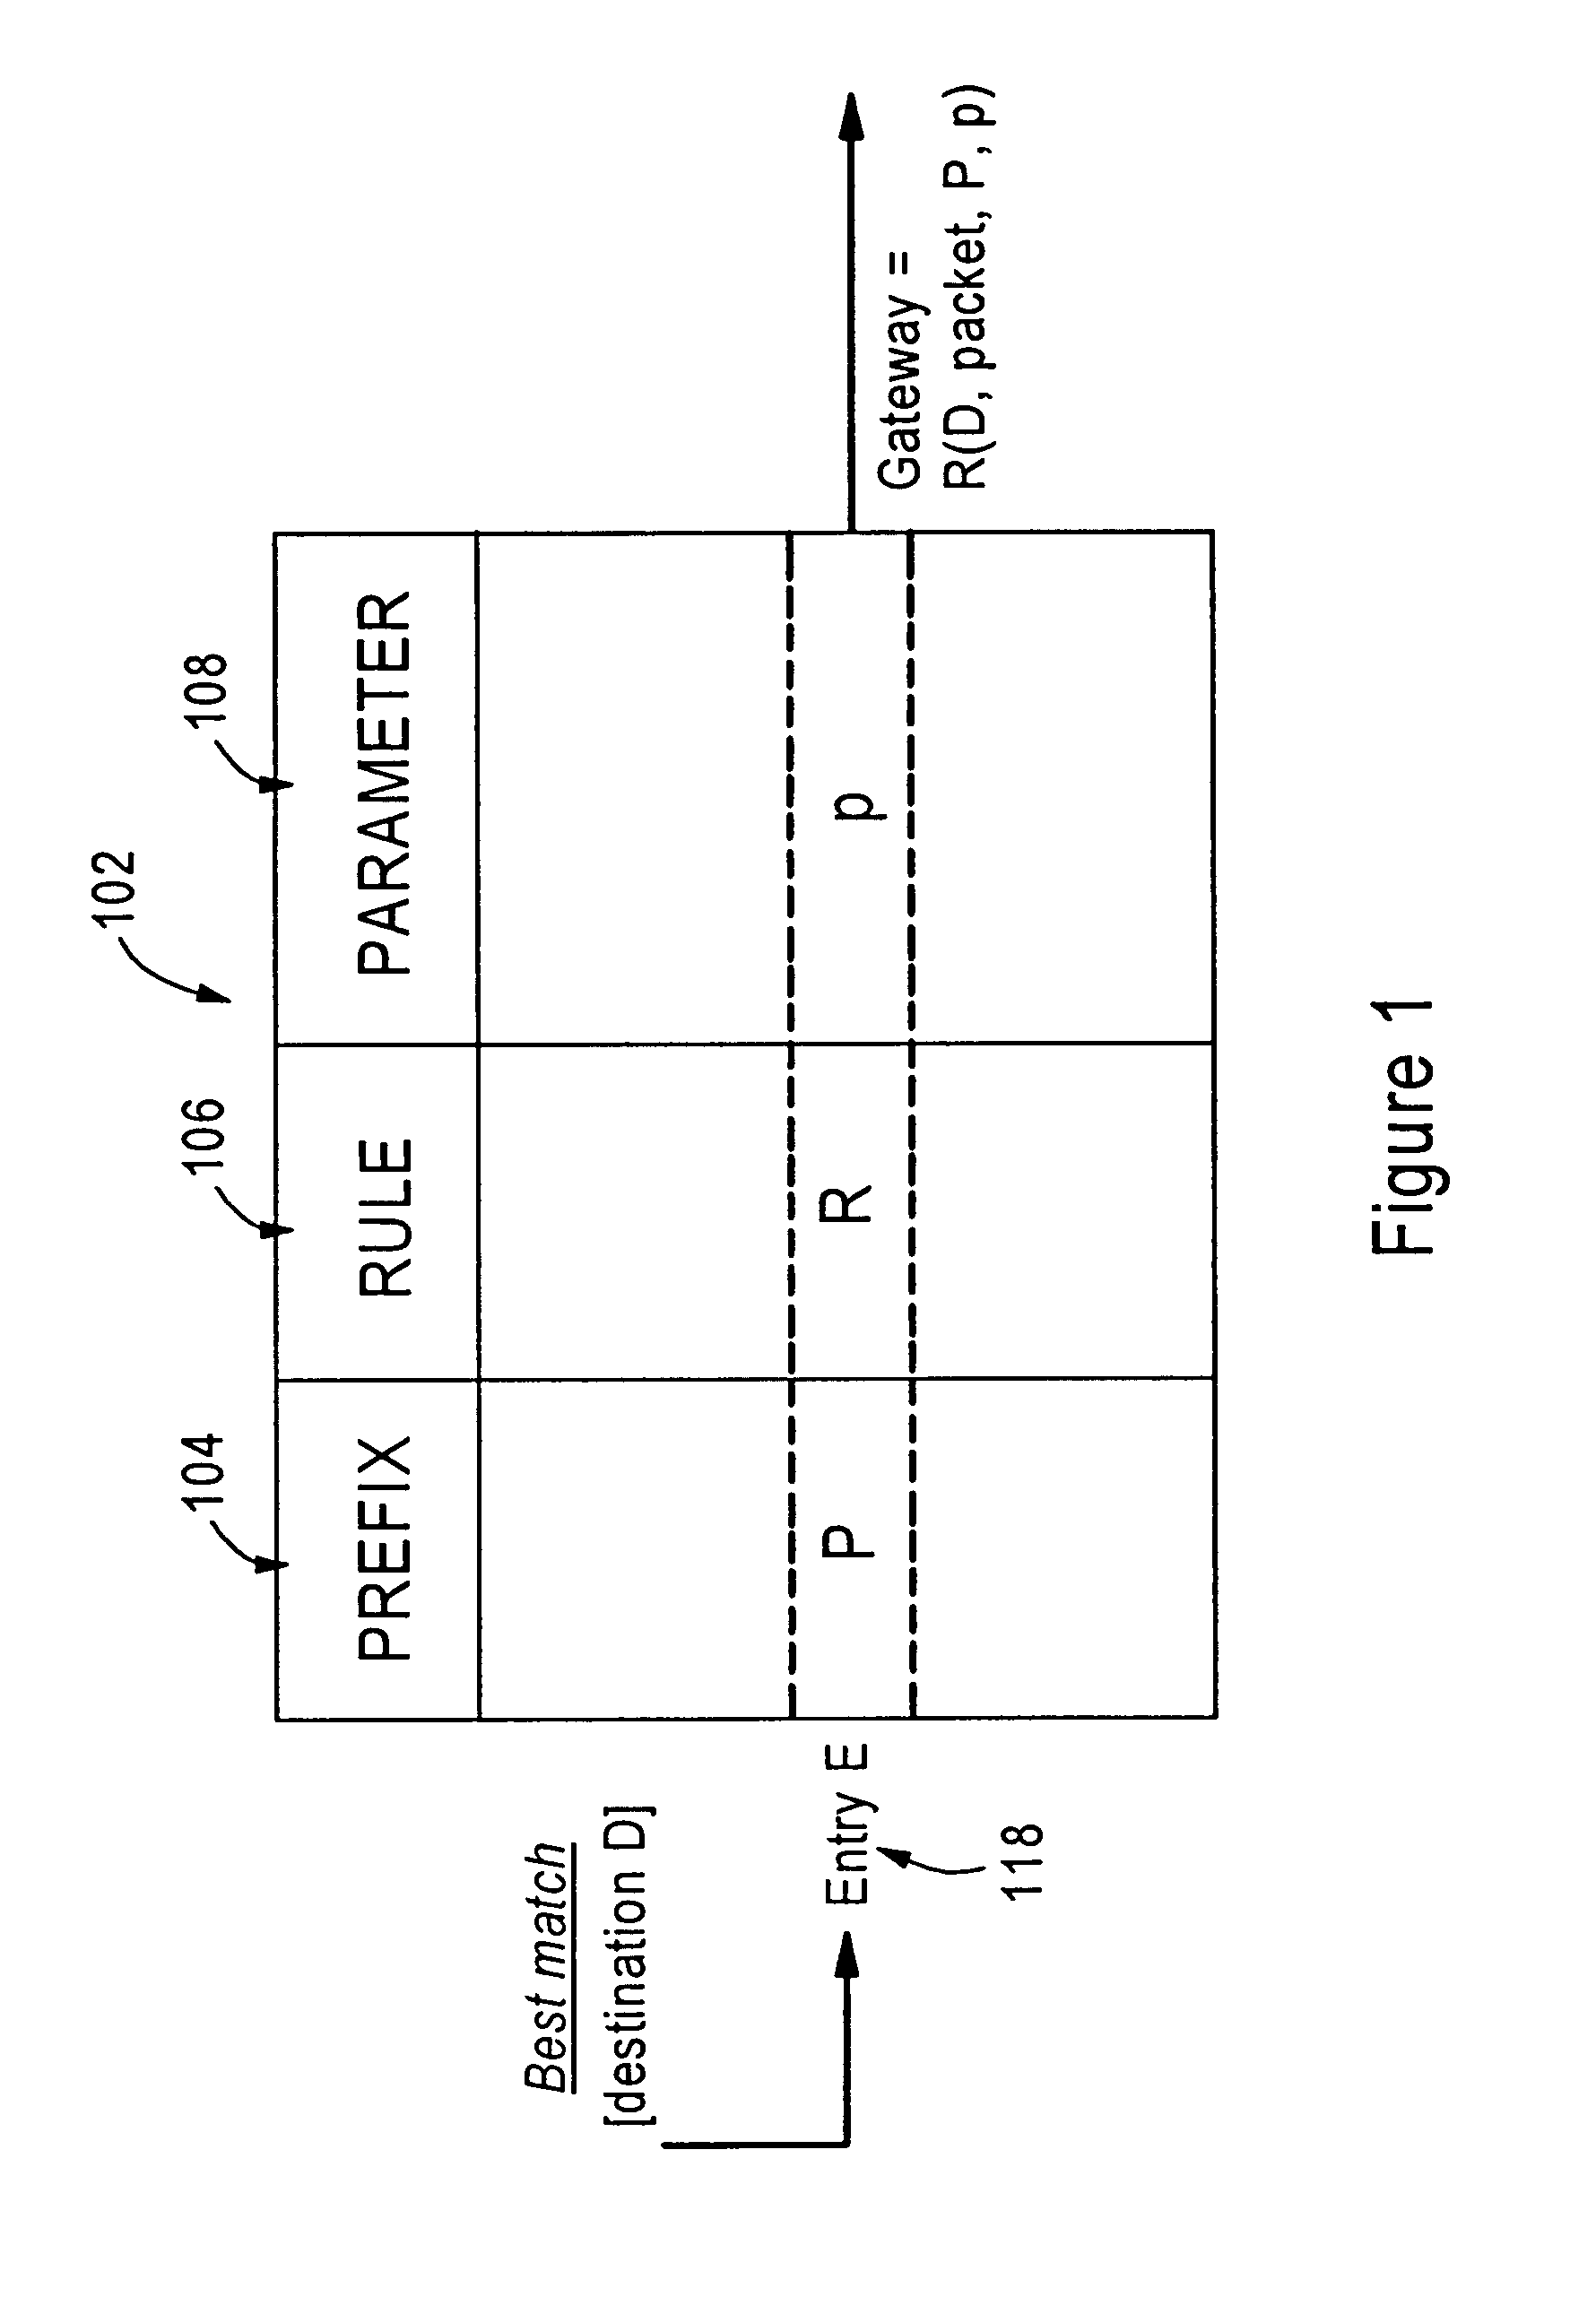 Arrangement in a router for distributing a routing rule used to generate routes based on a pattern of a received packet